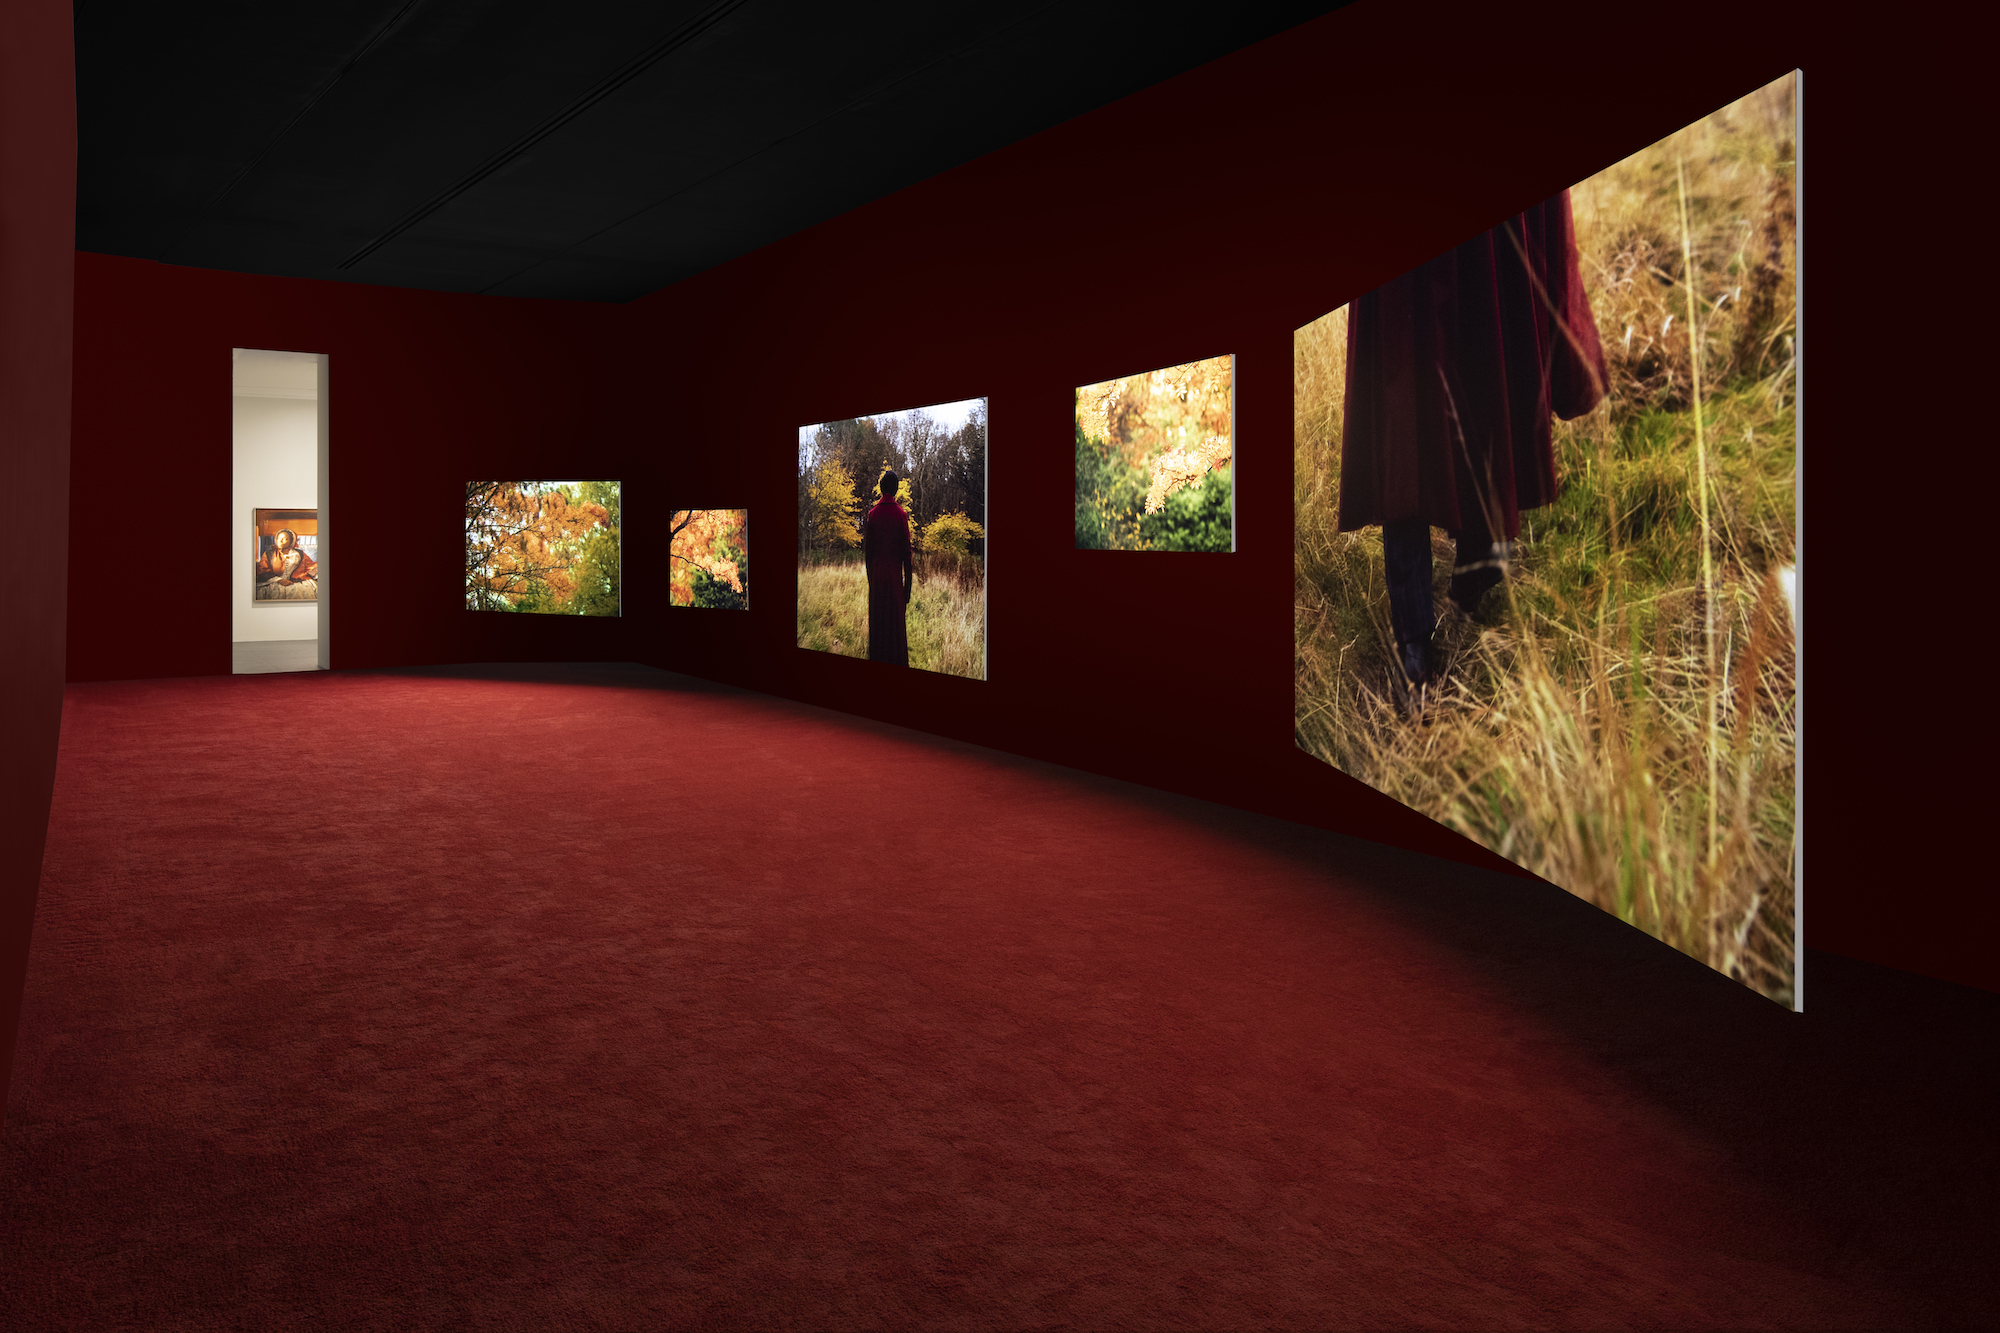 Five screens of varying sizes in a room with red walls and carpets.